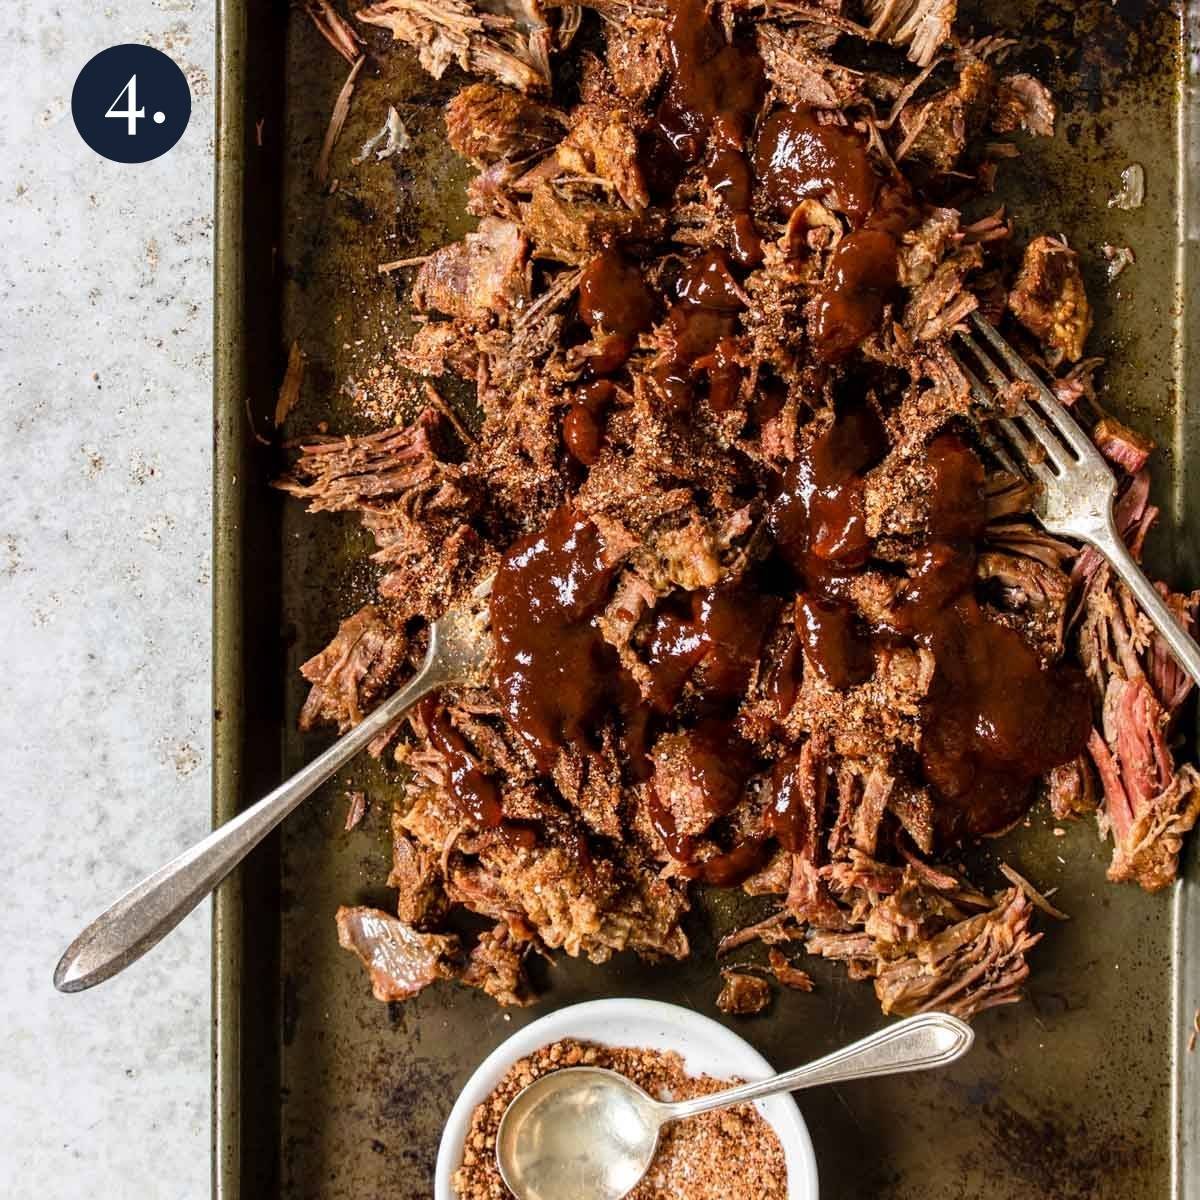 BBQ sauce poured over shredded beef